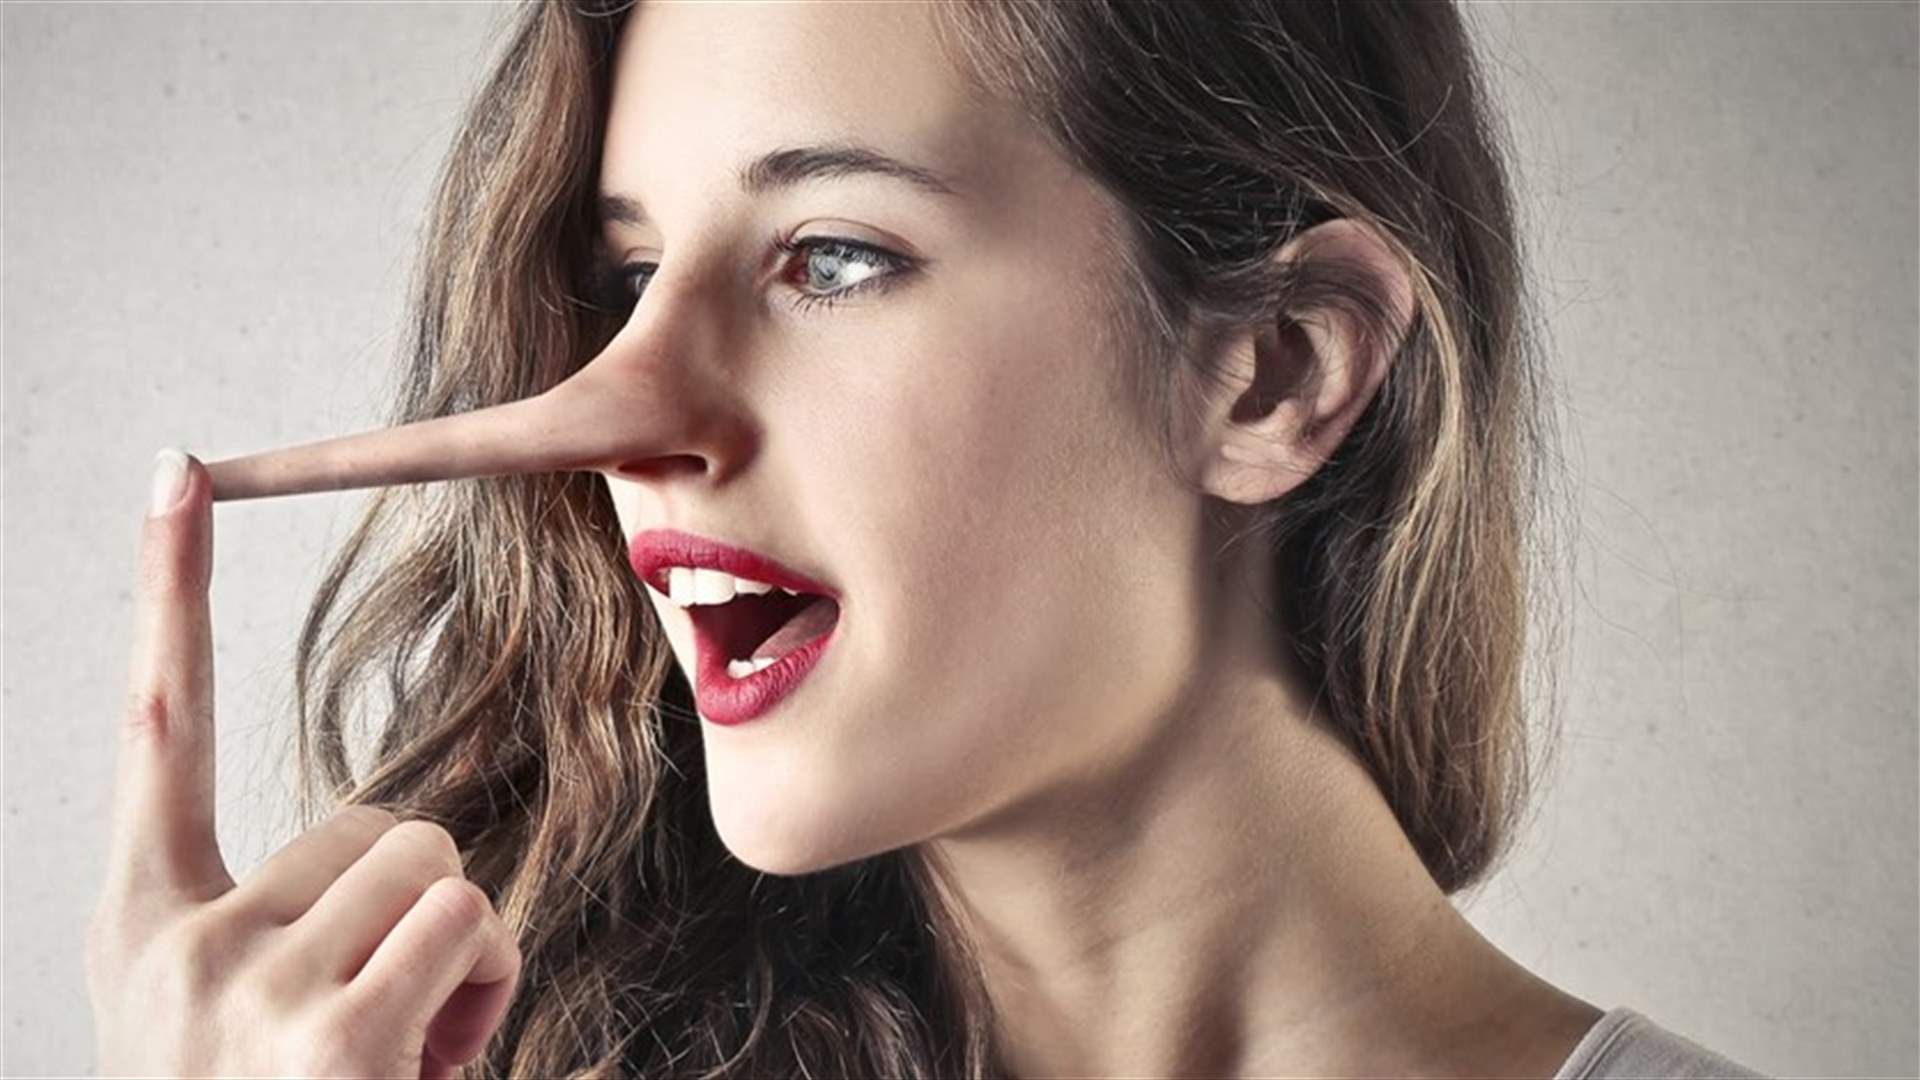 How To Tell If Someone Is Lying&#63;